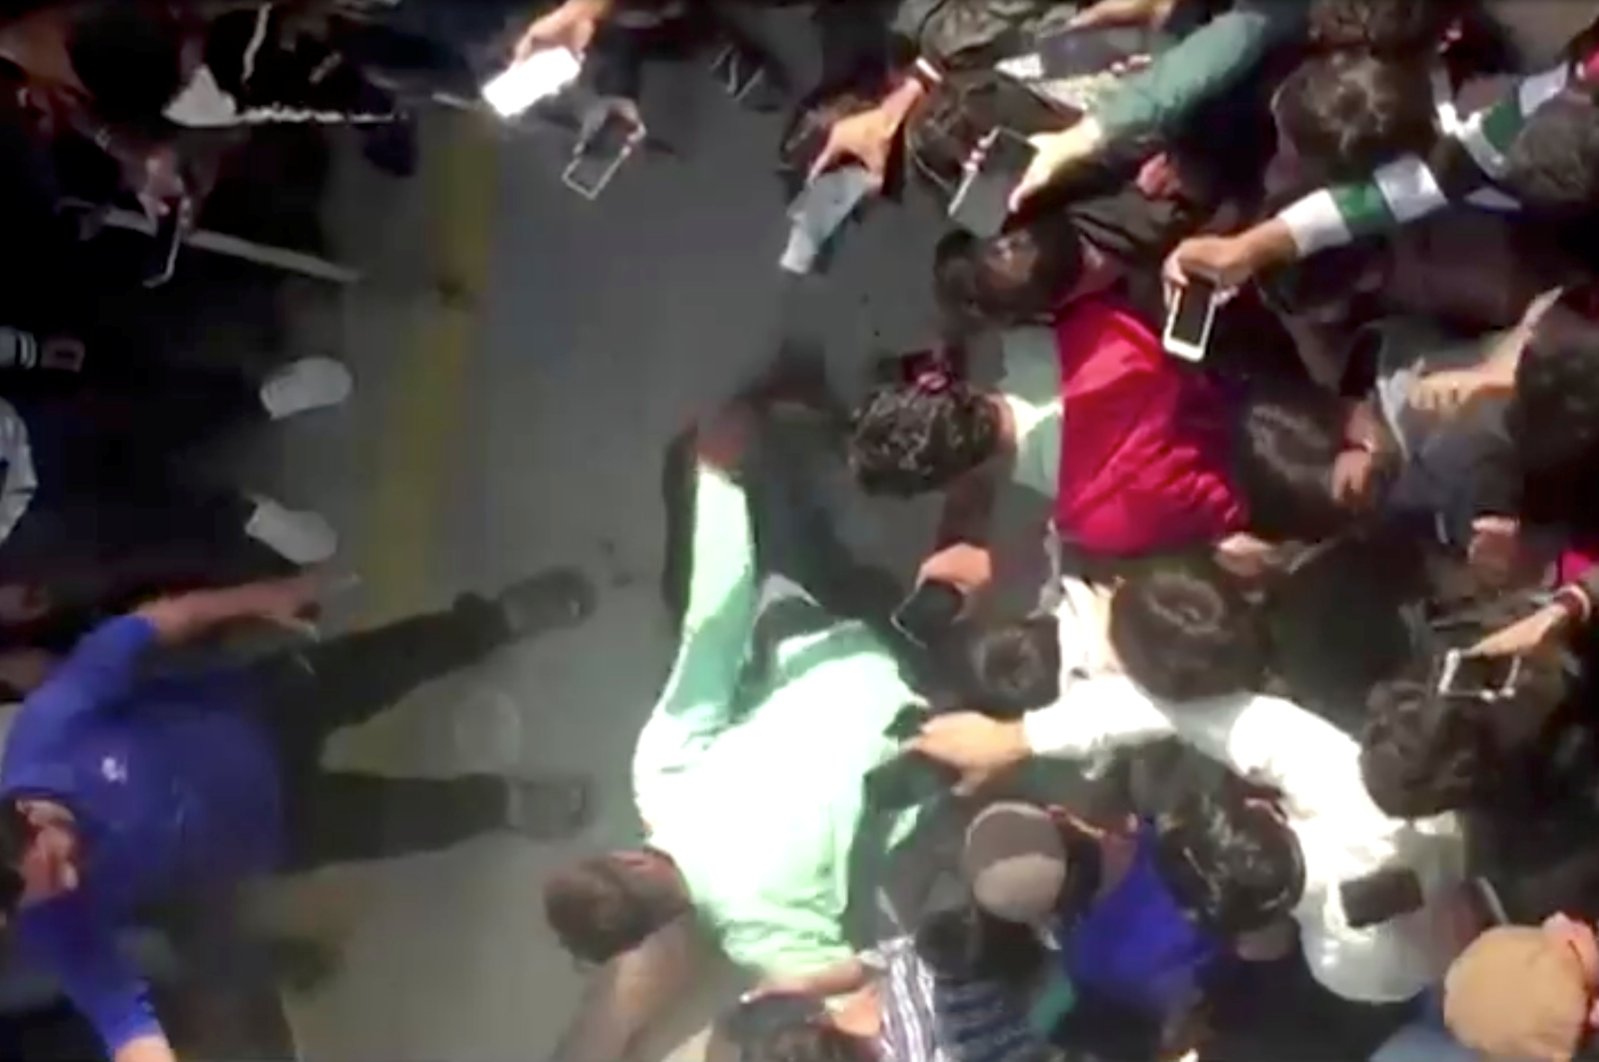 People gather around the body of a Sri Lankan manager in this screen grab taken from a video after an attack on a factory manager in Sialkot, Pakistan, Dec. 3, 2021. (REUTERS TV via REUTERS)